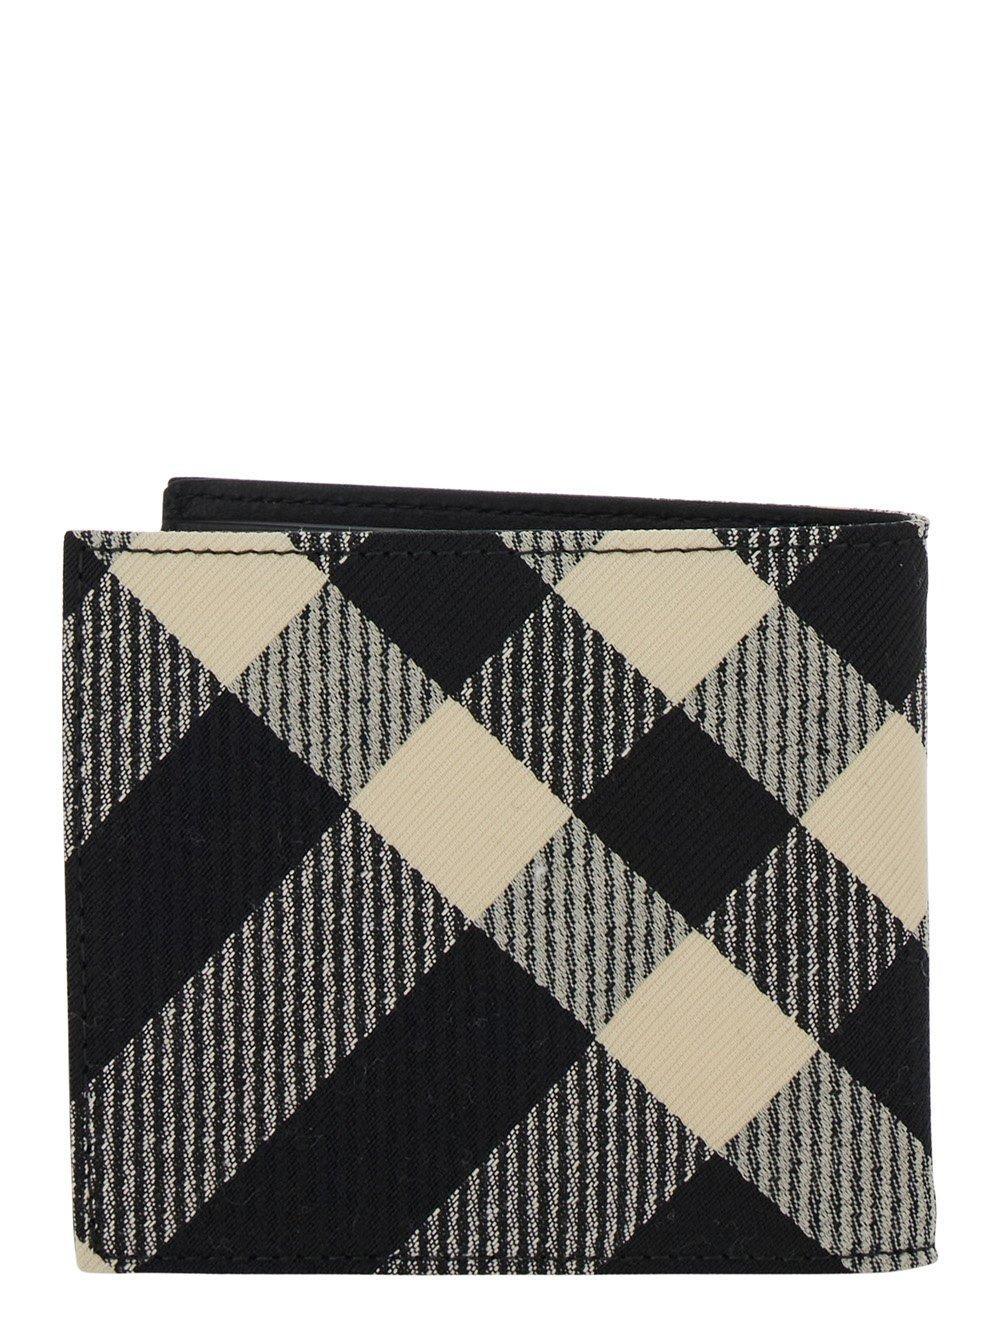 Shop Burberry Check Patterned Bi-fold Wallet In Black Calico